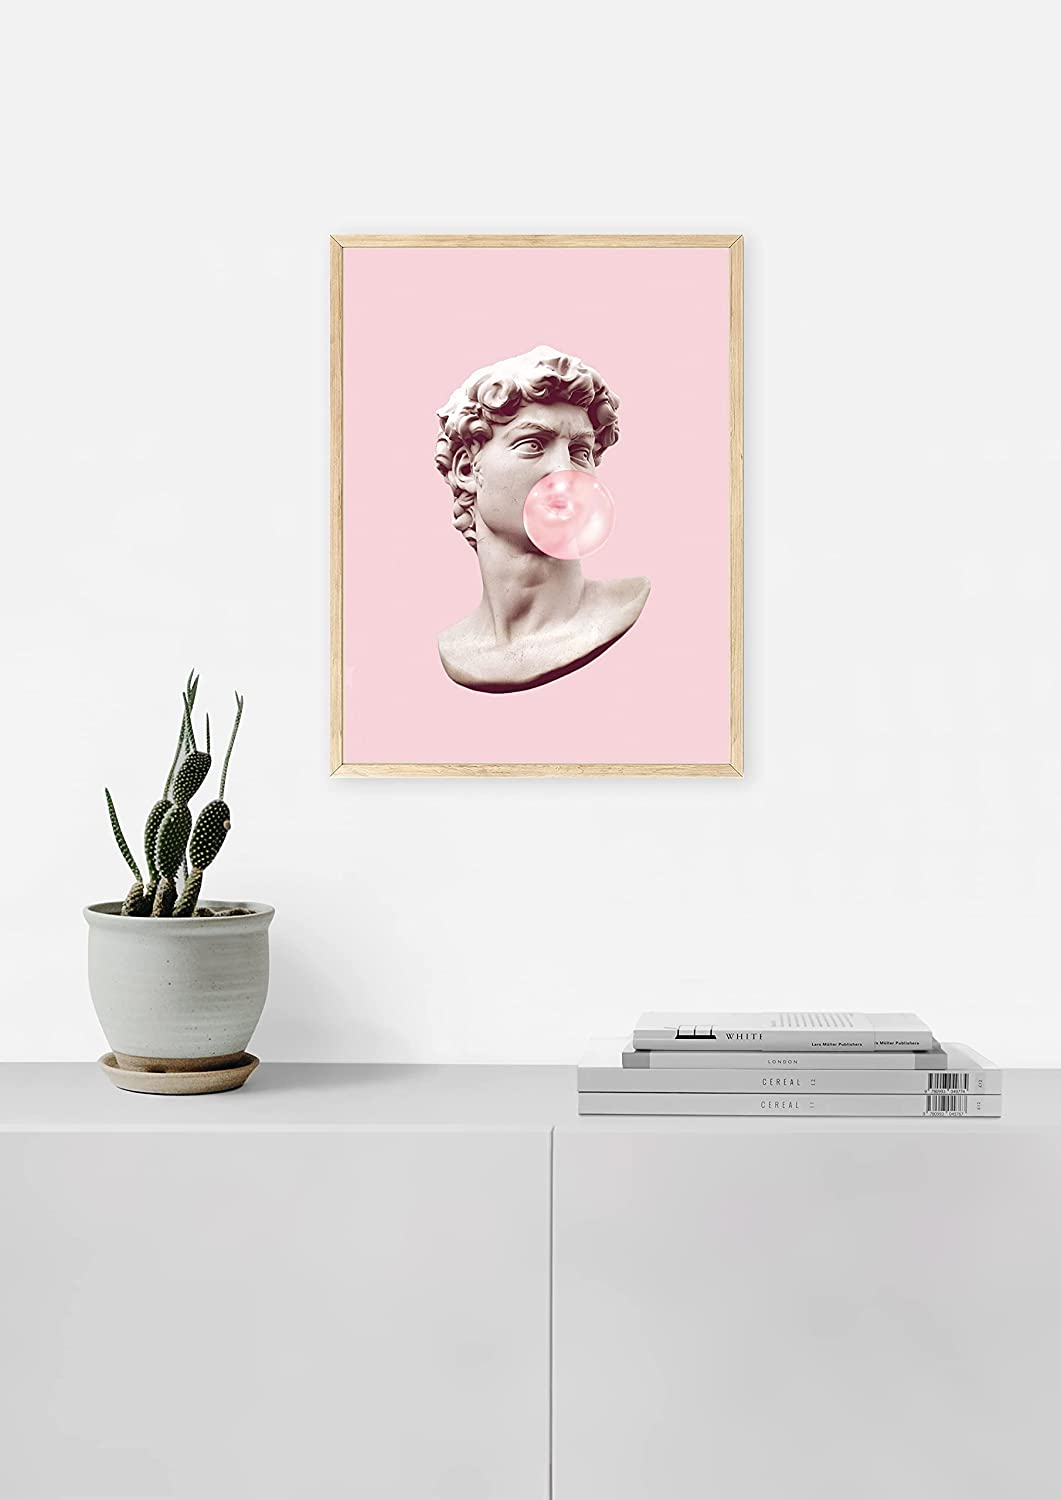 HAUS AND HUES Gum Poster David Bubble Pop Art, Pop Art Wall Decor Pink  Pictures Wall Decor Pink Posters for Room Aesthetic, Blush Pink Room Decor  for Bedroom Wall Art Pop Art